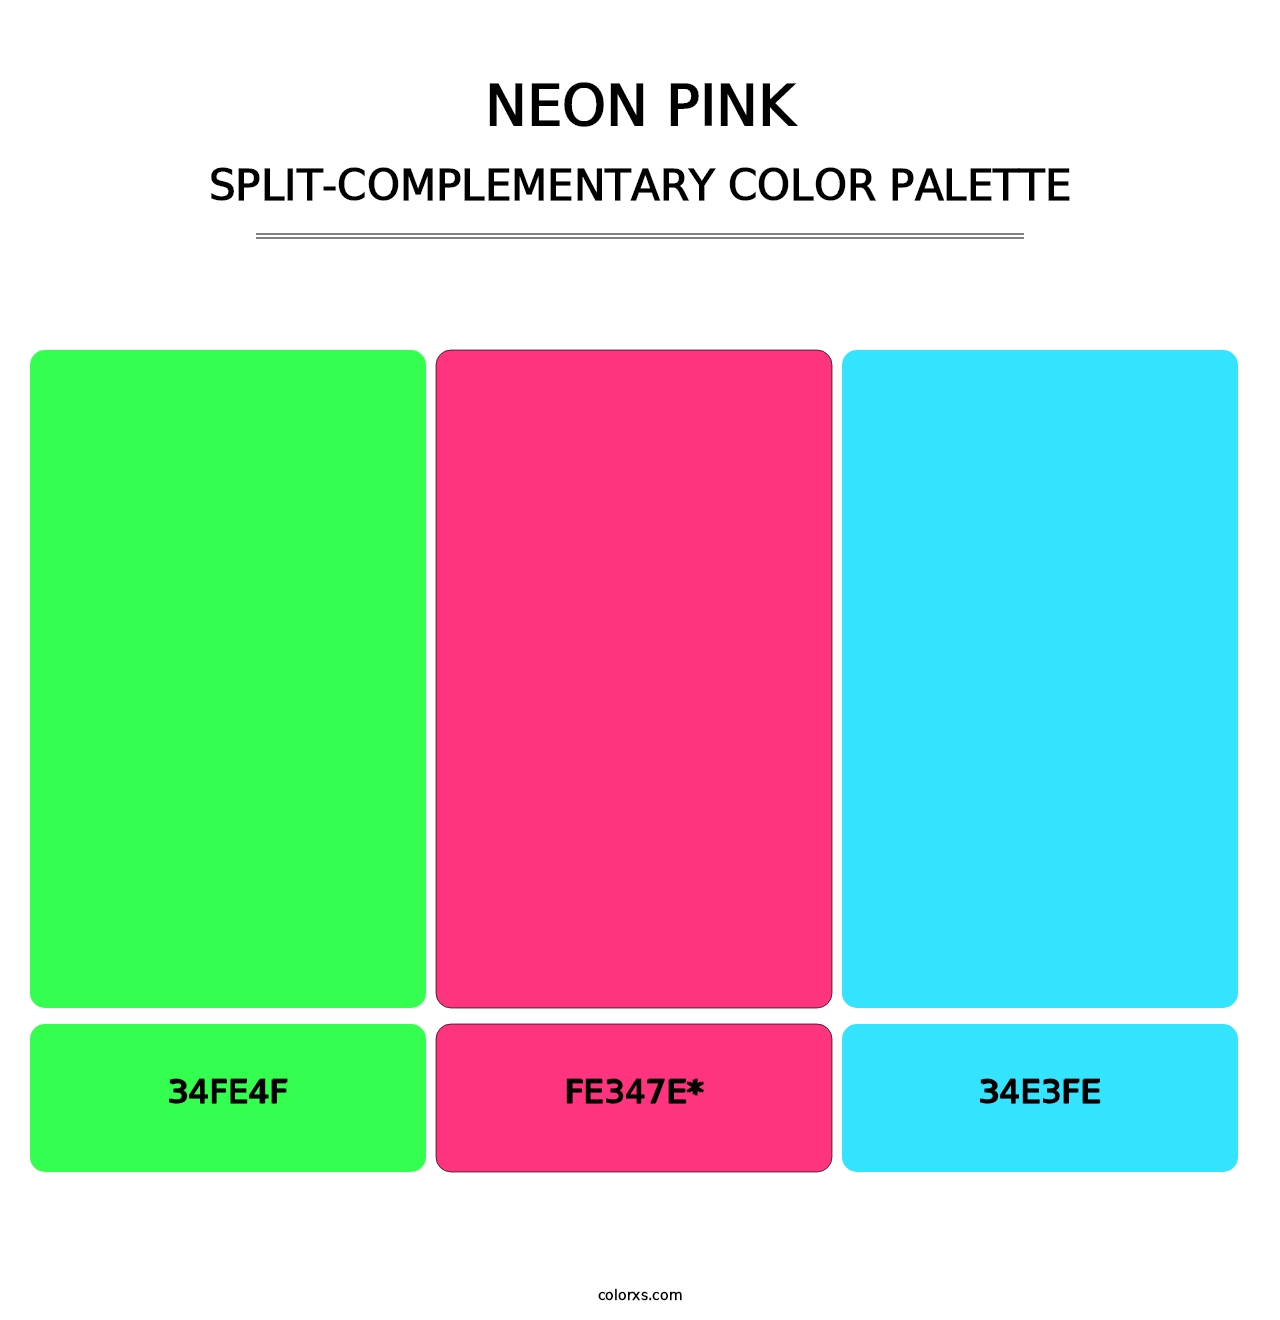 Neon Pink - Split-Complementary Color Palette